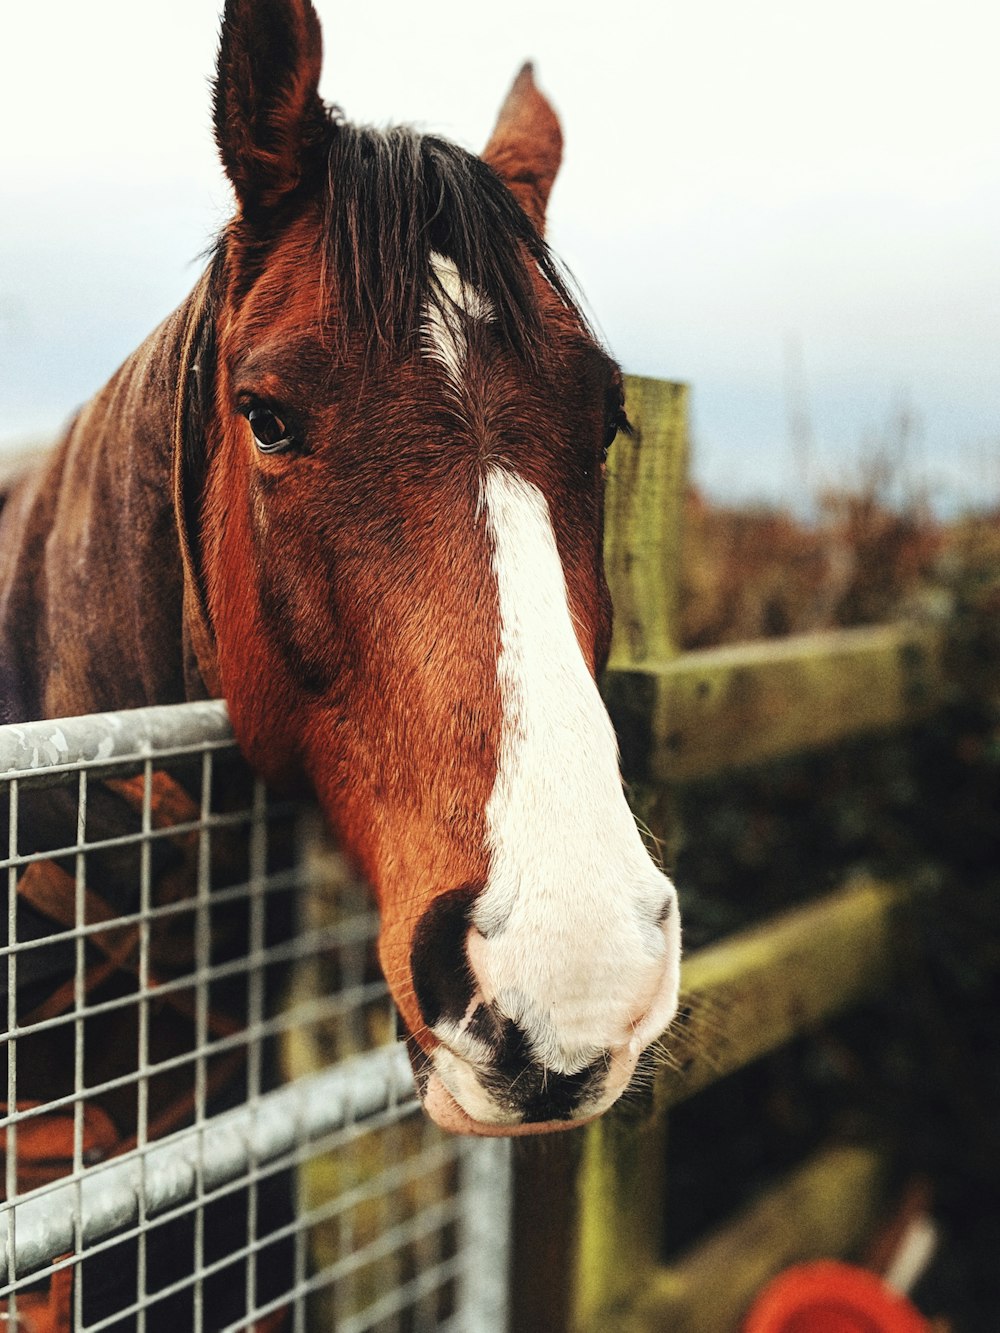 close-up photo of brown and white horse